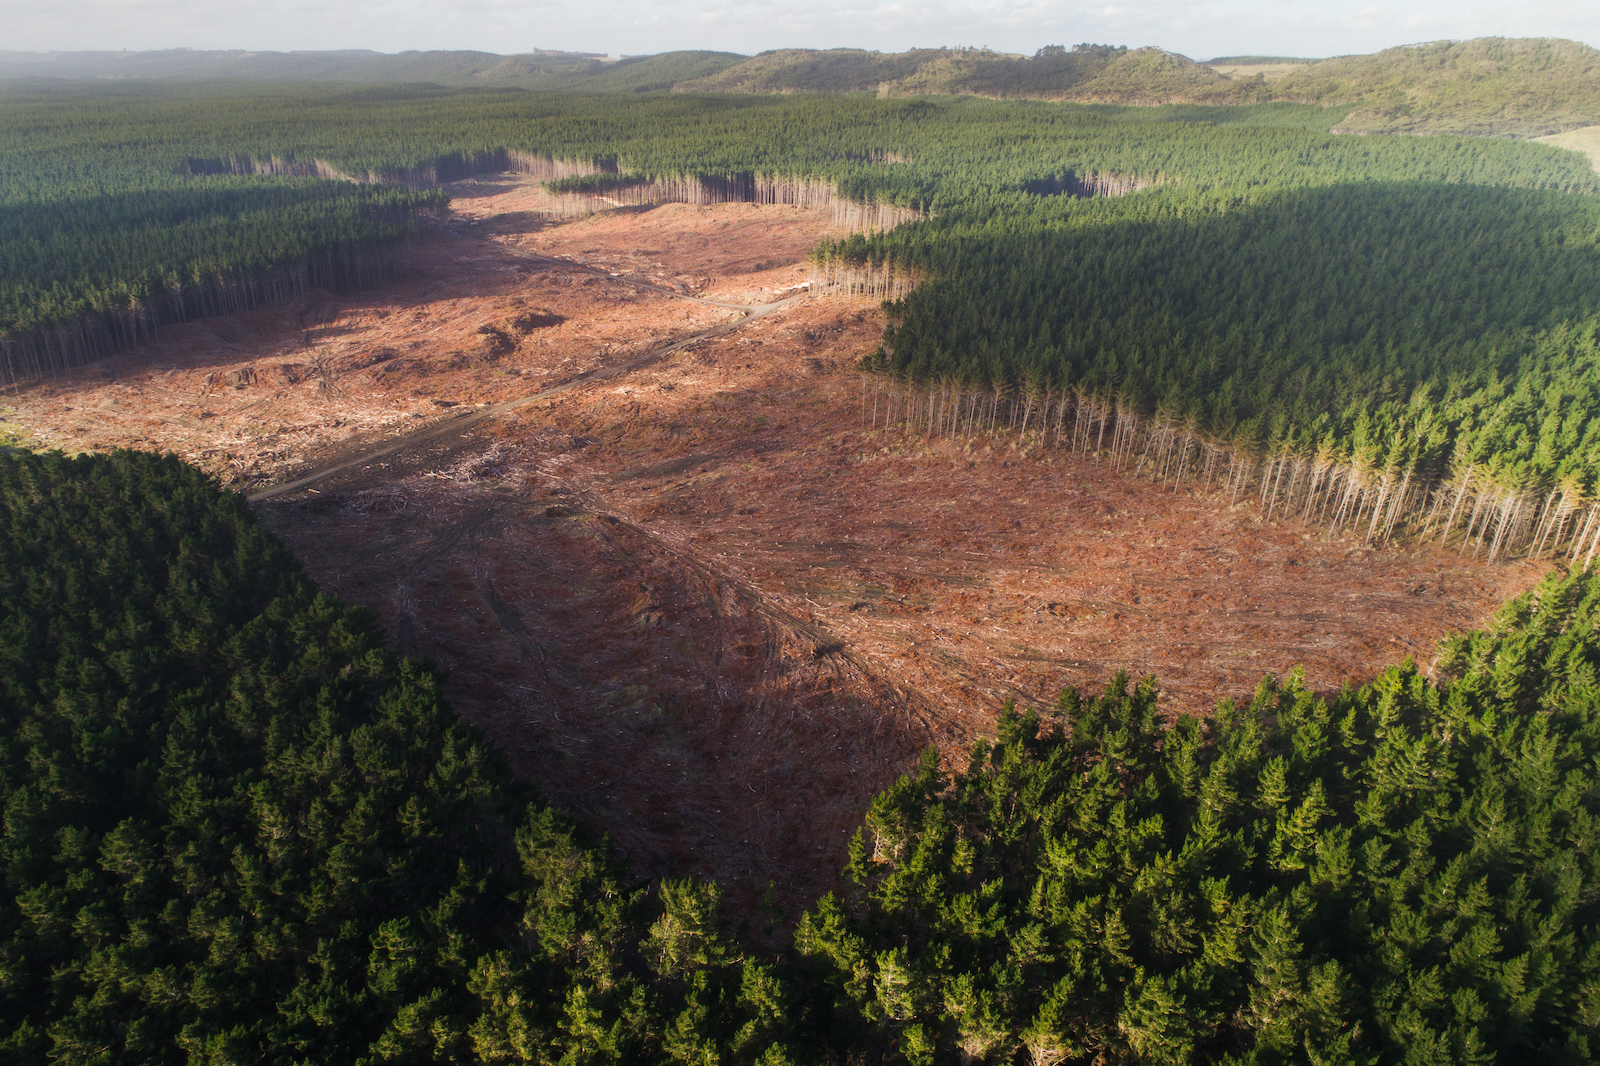 Deforestation emissions far higher than previously thought, study finds